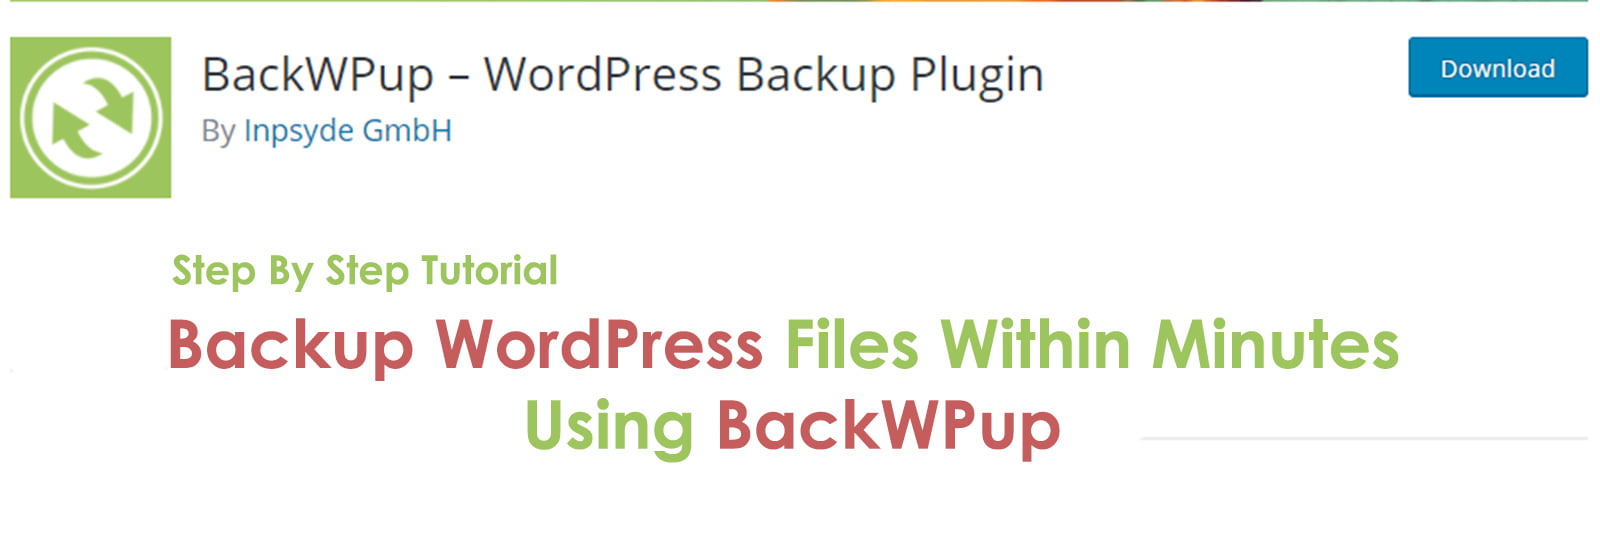 BackWPup Backup Plugins feature